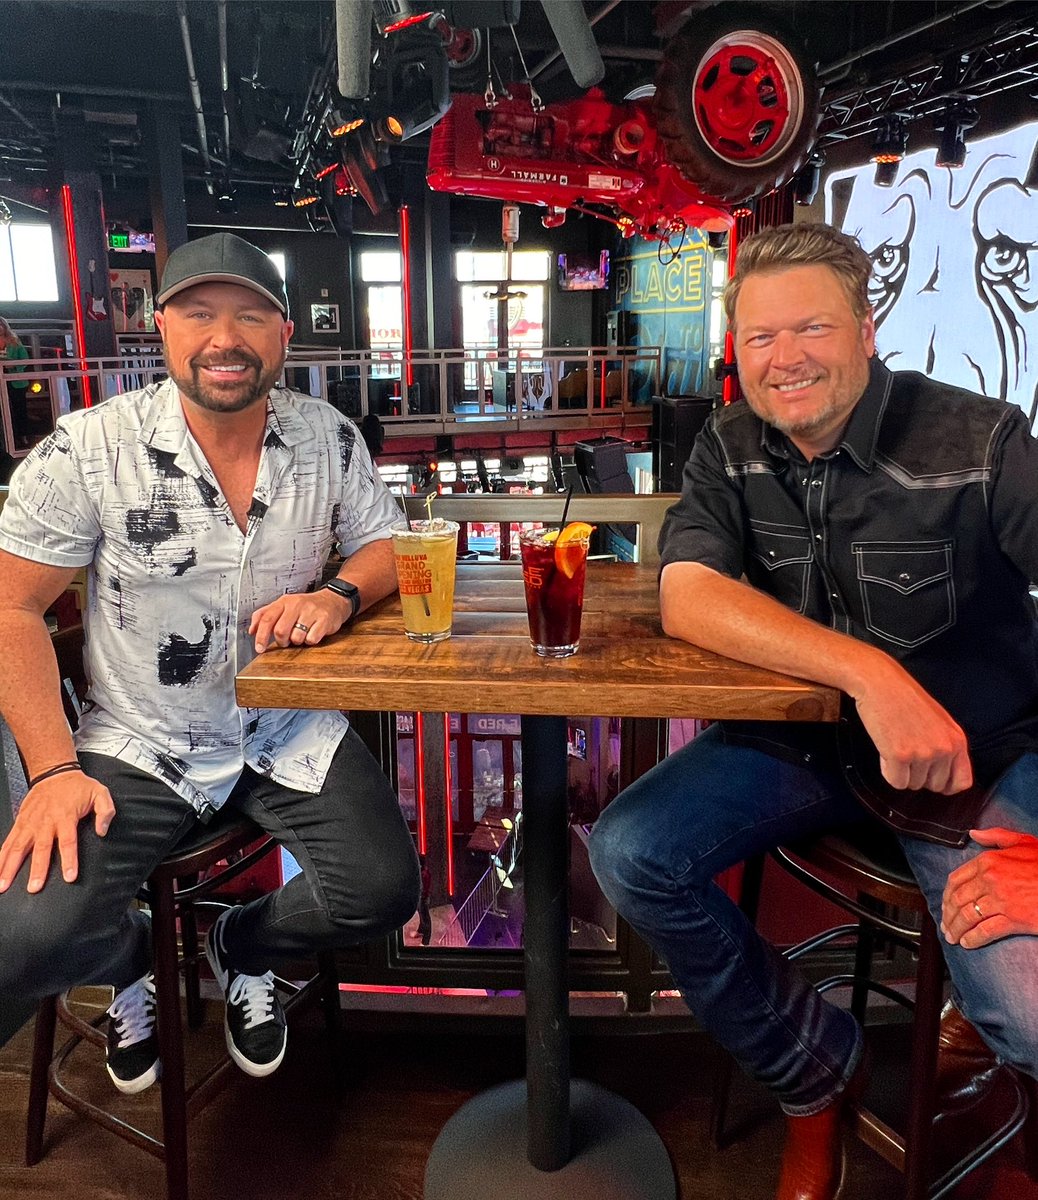 Blake Shelton from his new @OleRed location in Vegas! Watch our interview this weekend on HOT 20 Saturday & Sunday 9am/8c @CMT @cmtHot20 @blakeshelton